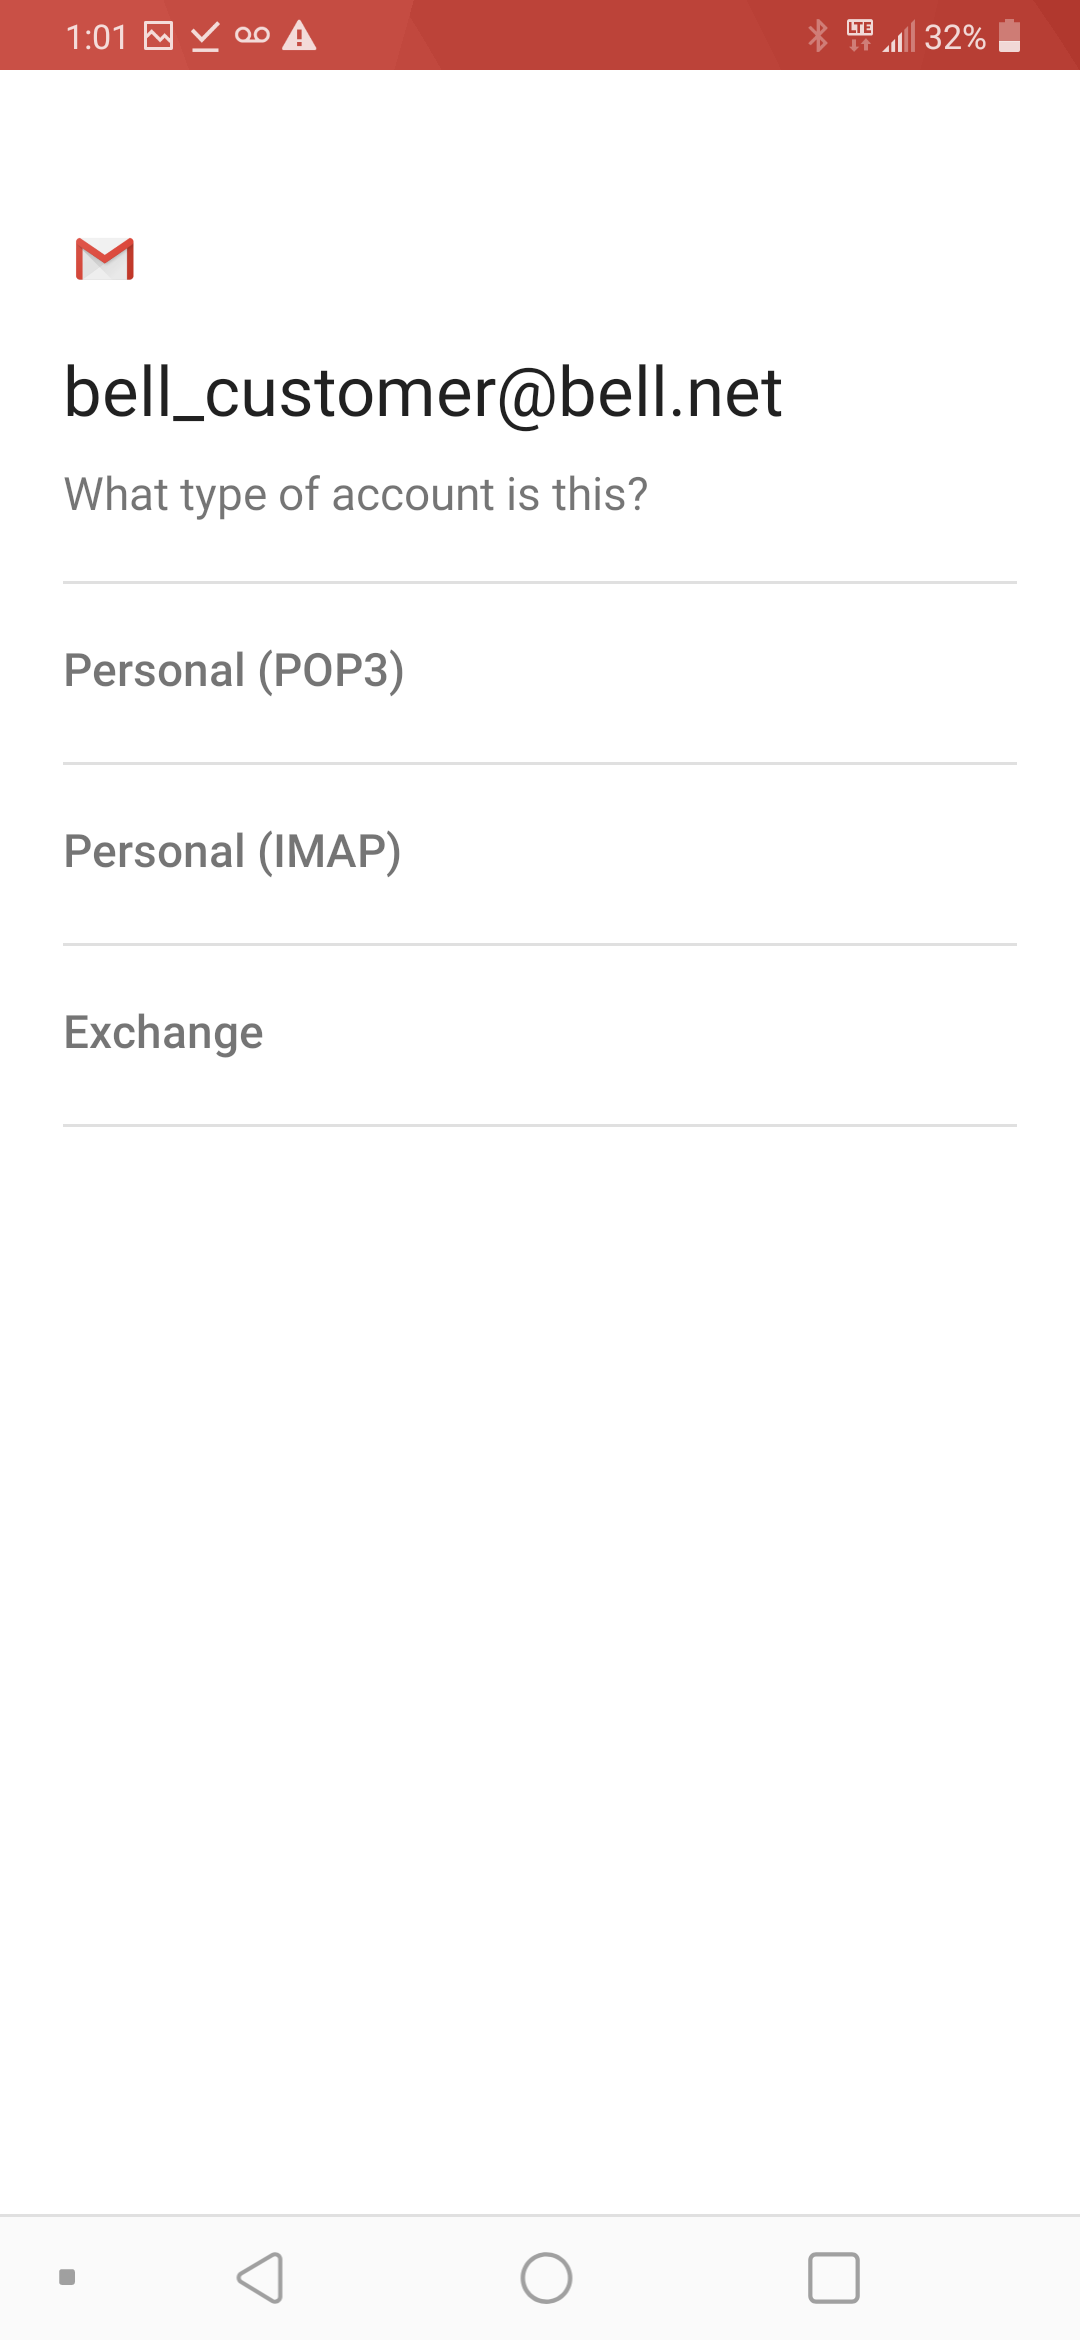 Touch Personal (IMAP).